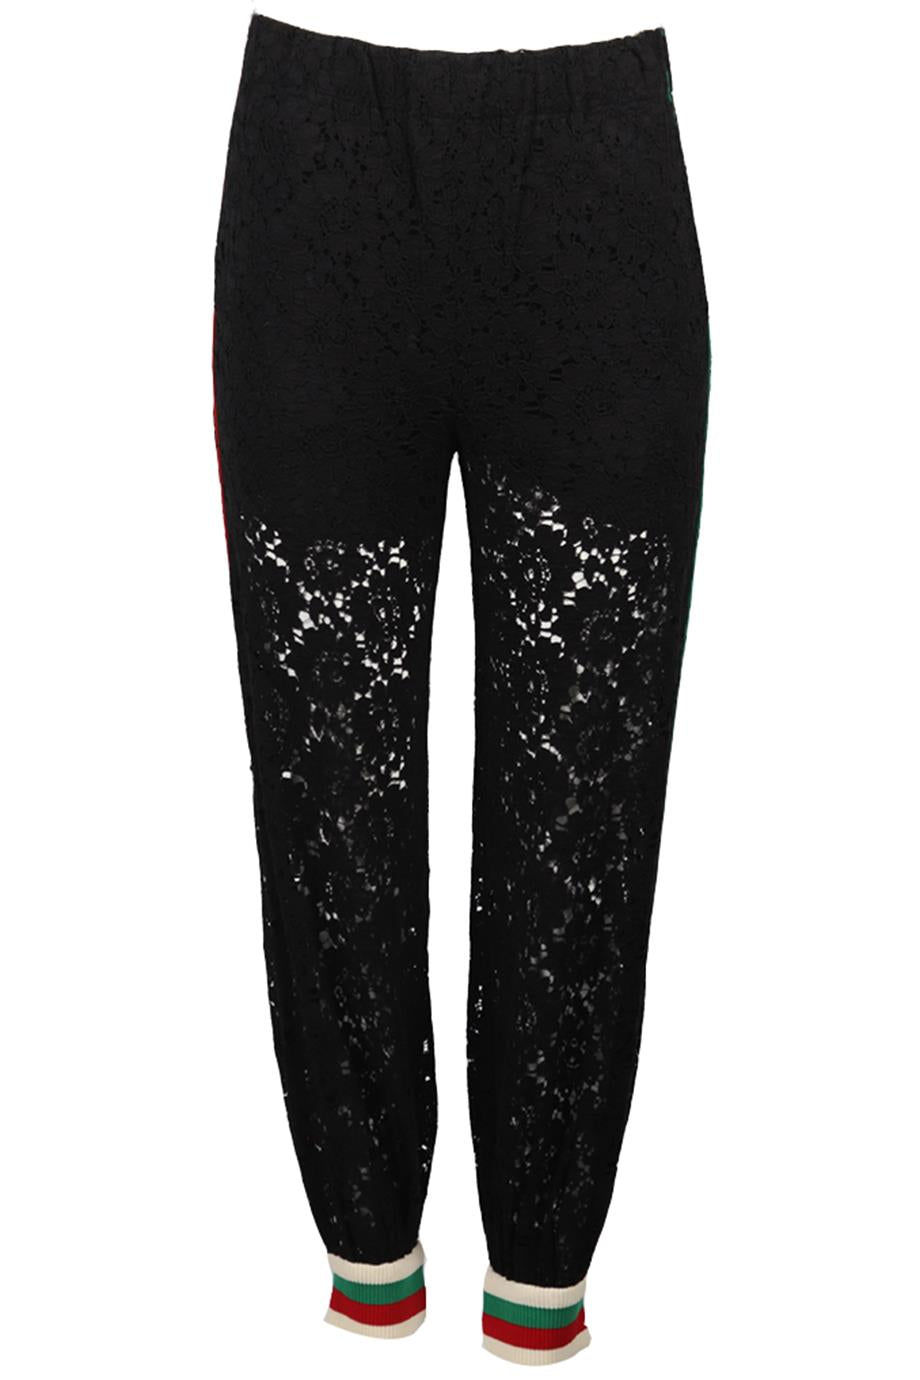 GUCCI LACE AND SILK TRACK PANTS IT 36 UK 4